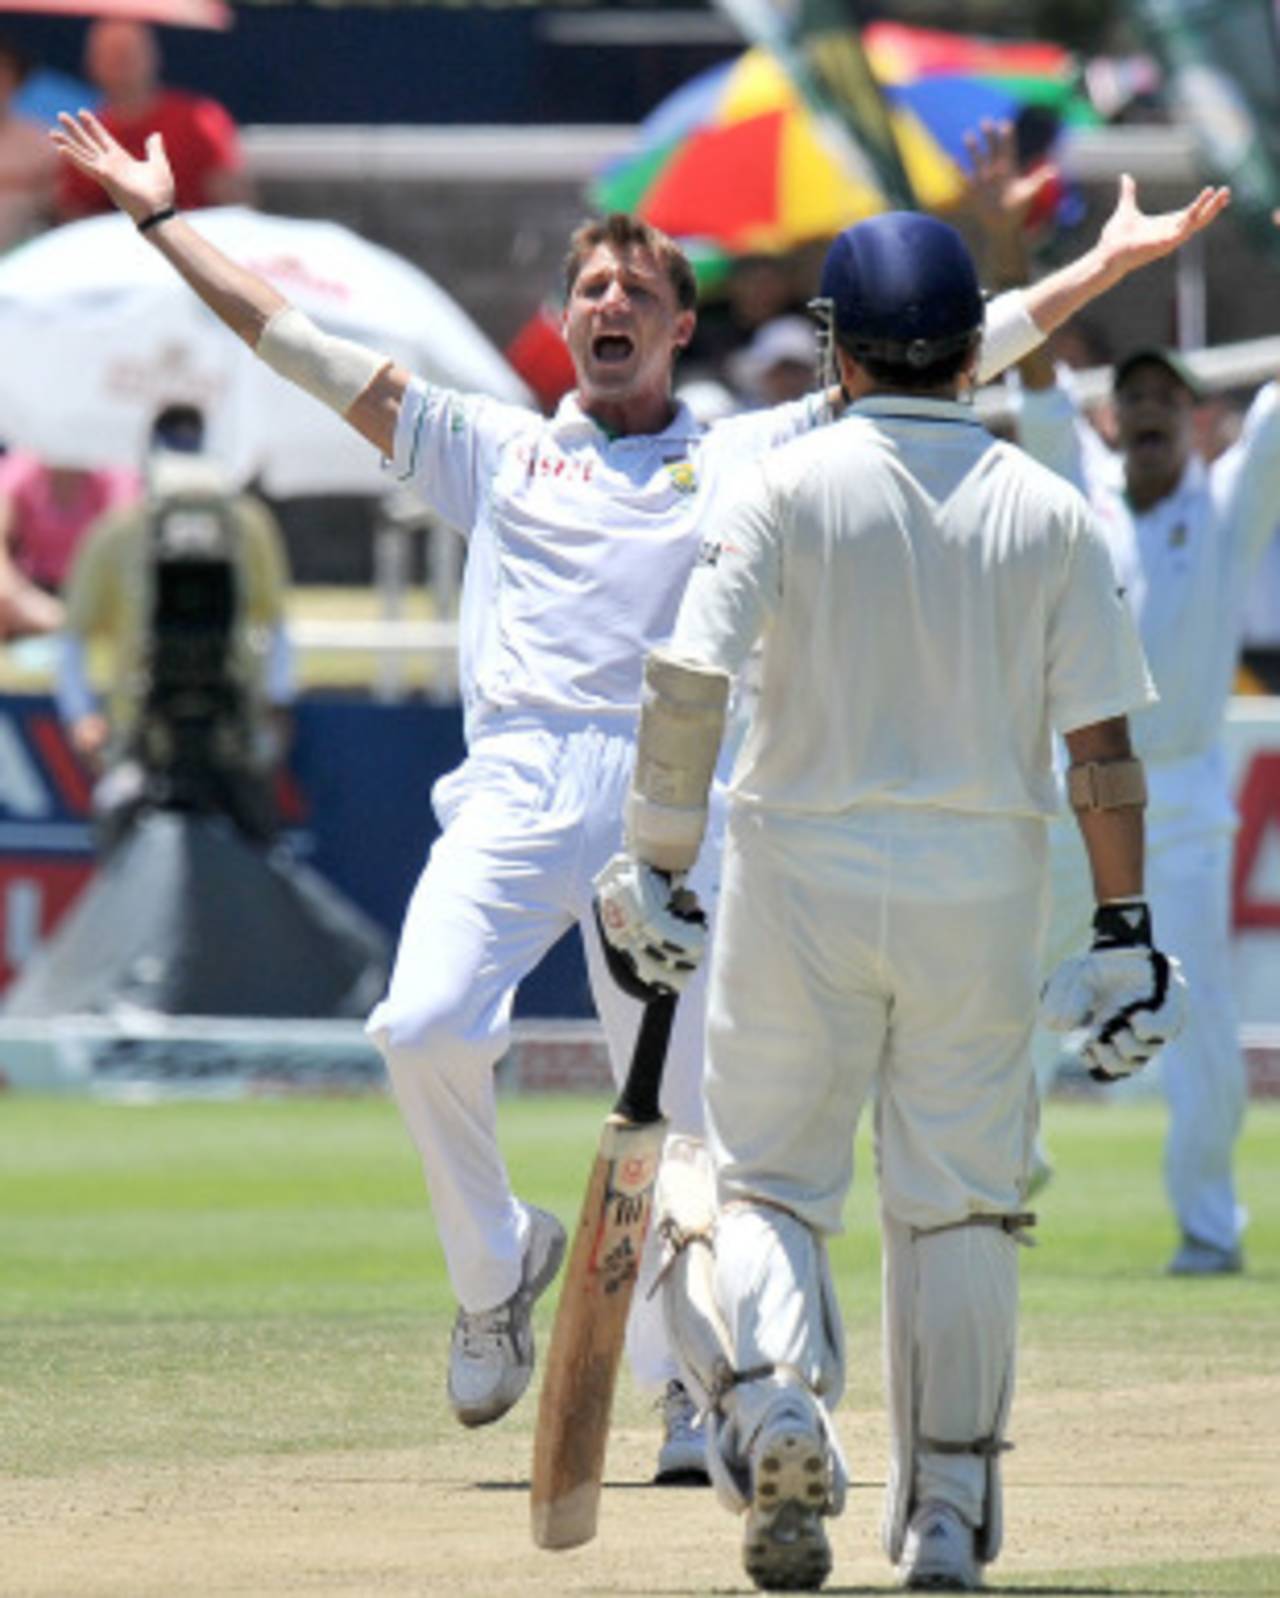 Dale Steyn appeals successfully for an lbw against Cheteshwar Pujara, South Africa v India, 3rd Test, Cape Town, 3rd day, January 4, 2011